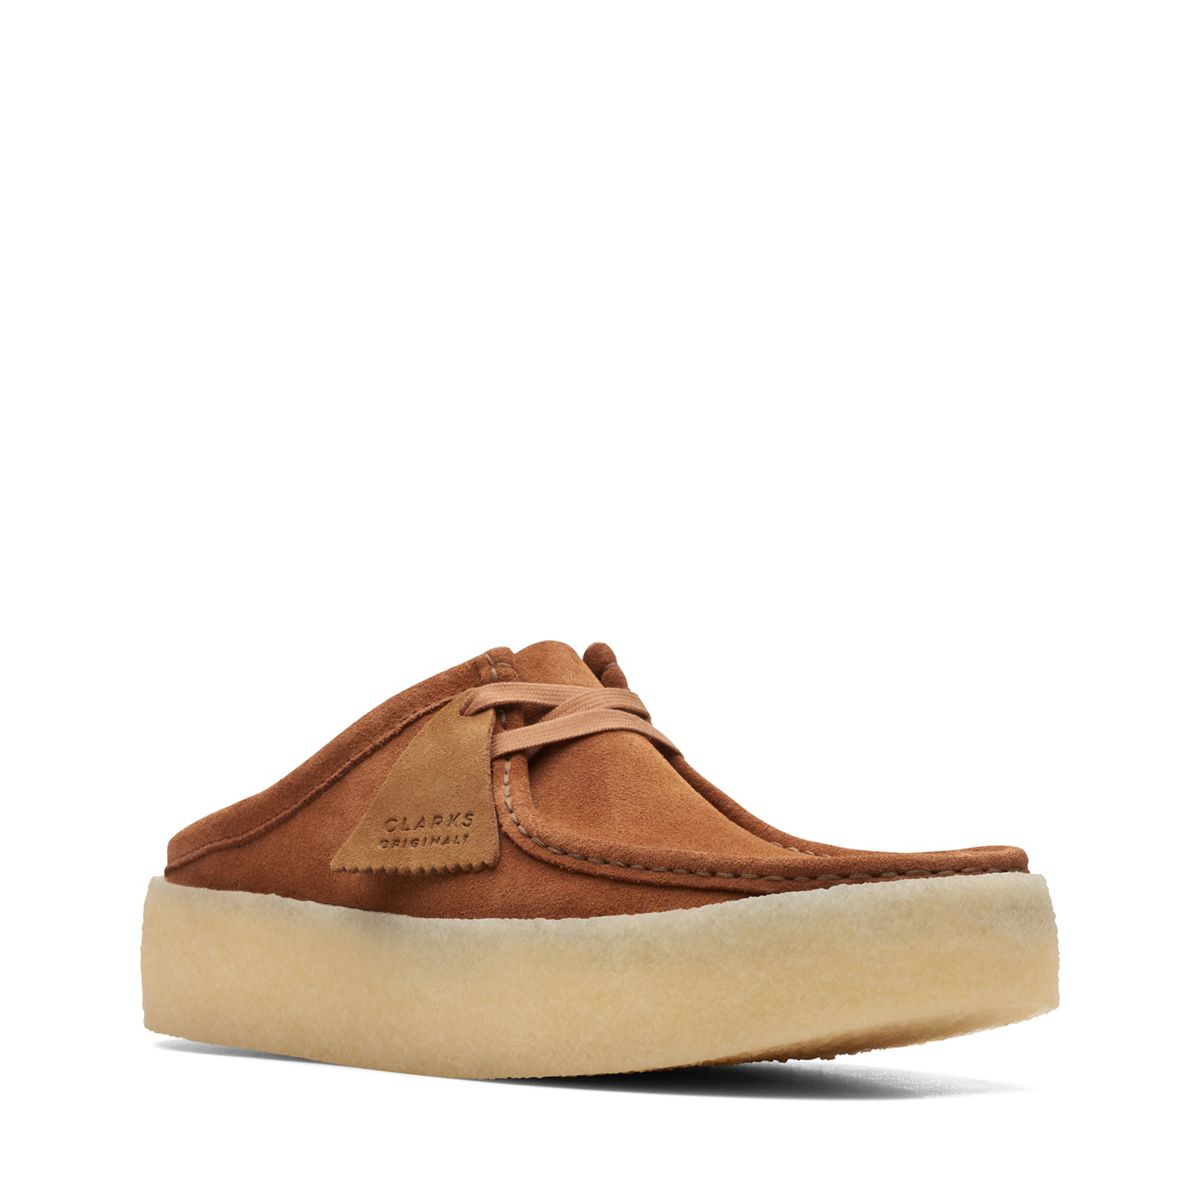 Wallabee Cup Lo Tan Suede - Clarks Canada Official Site | Clarks Shoes